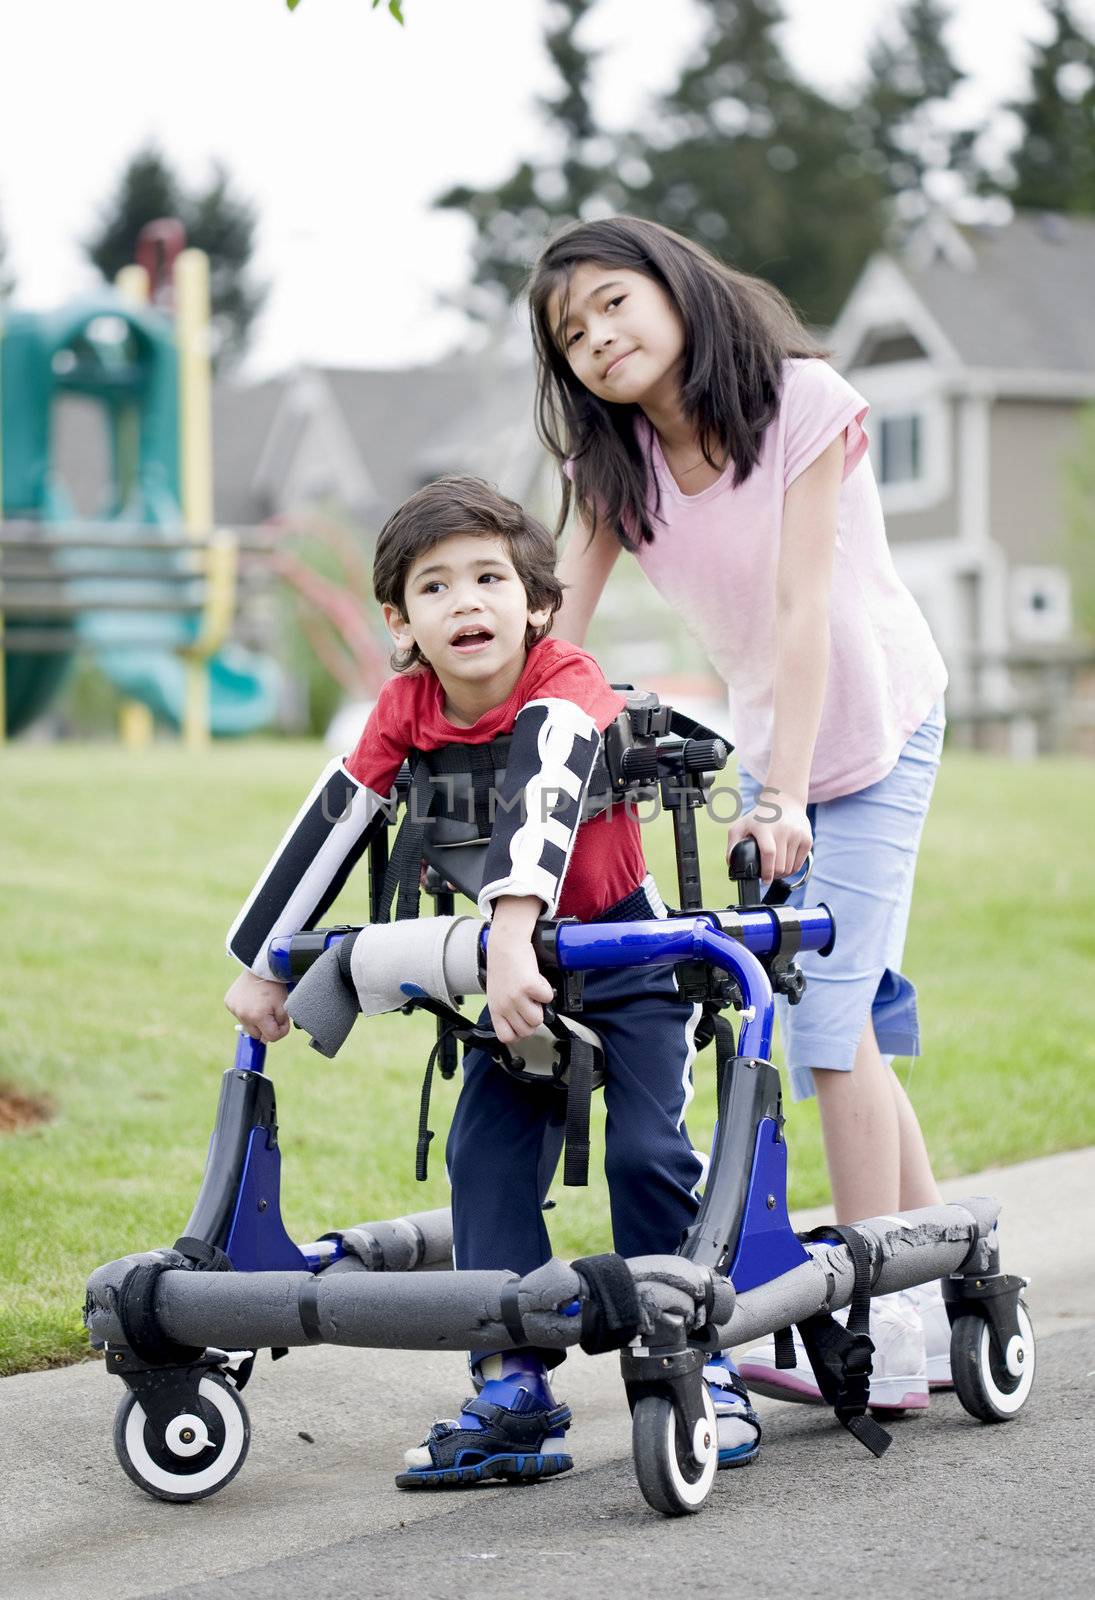 Big sister helping younger disabled brother in walker by jarenwicklund